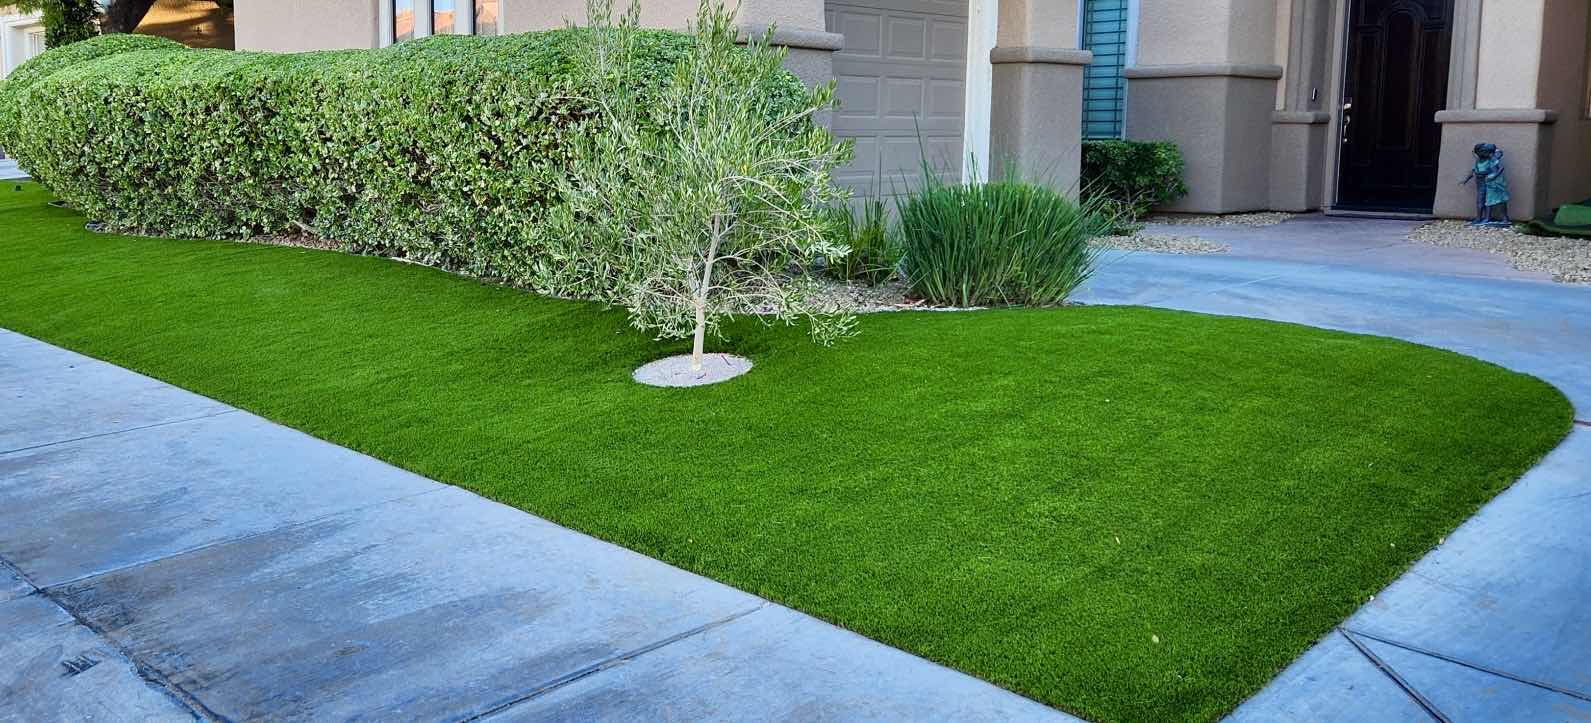 Photo 1 of PREMIUM HIGH-END ARTIFICIAL GRASS TURF 15’ x 100’ (1500 TOTAL SQ FT) ANTHEM COUNTRY CLUB APPROVED - TOTAL HEIGHT 1.97” (Pickup Sun June 2nd & Mon June 3rd)